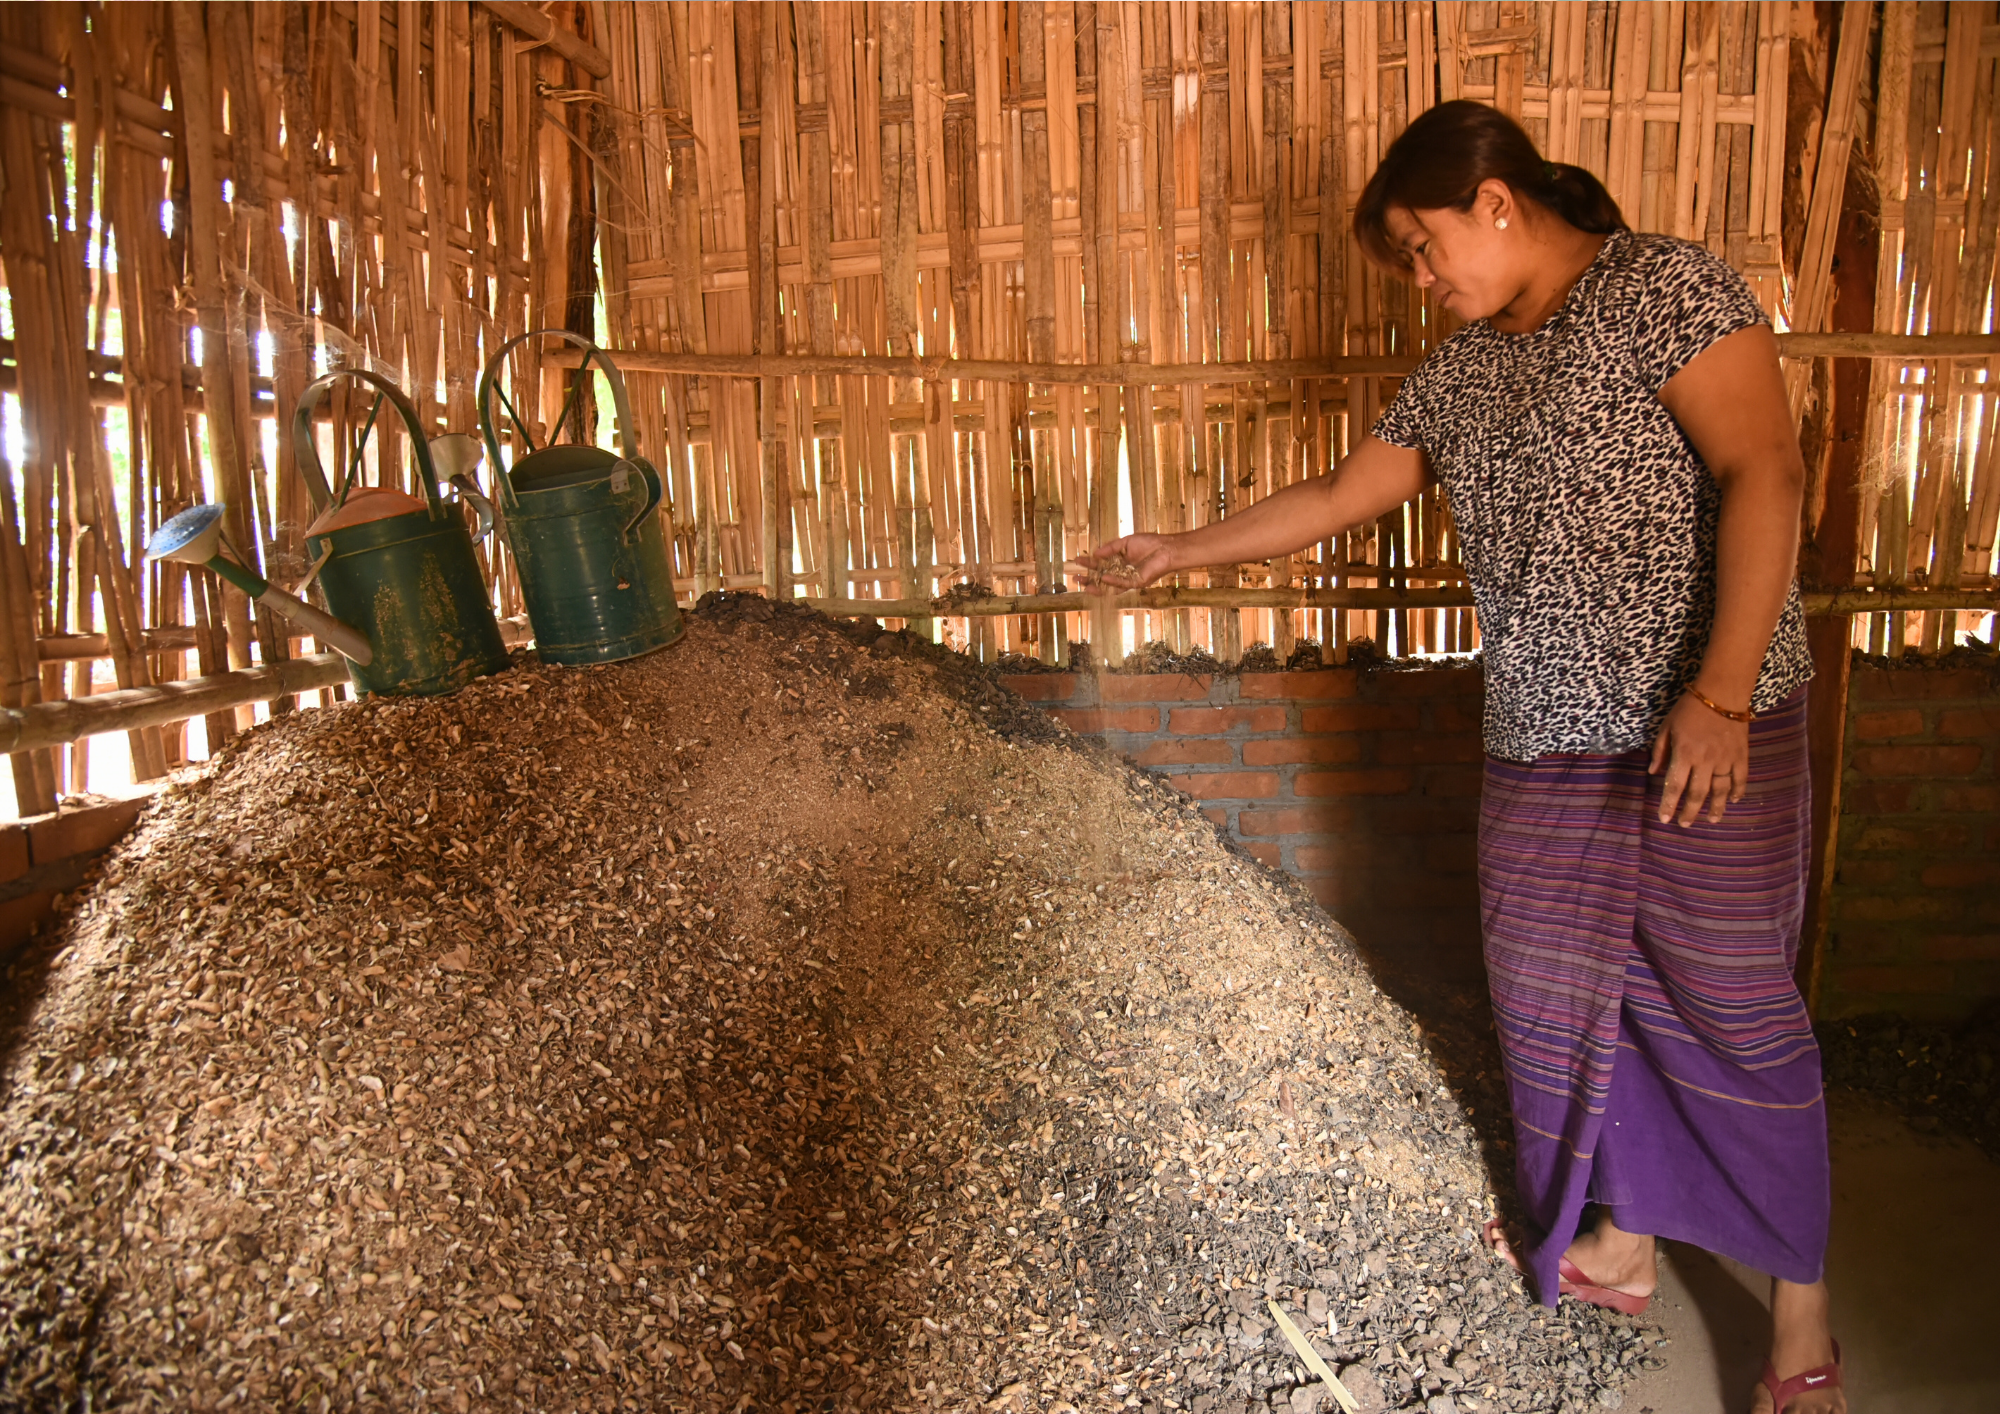 Precision in practice: Ma Mu Mu Htay meticulously inspects her initial natural fertilizer mixer, verifying the seamless blending of raw materials